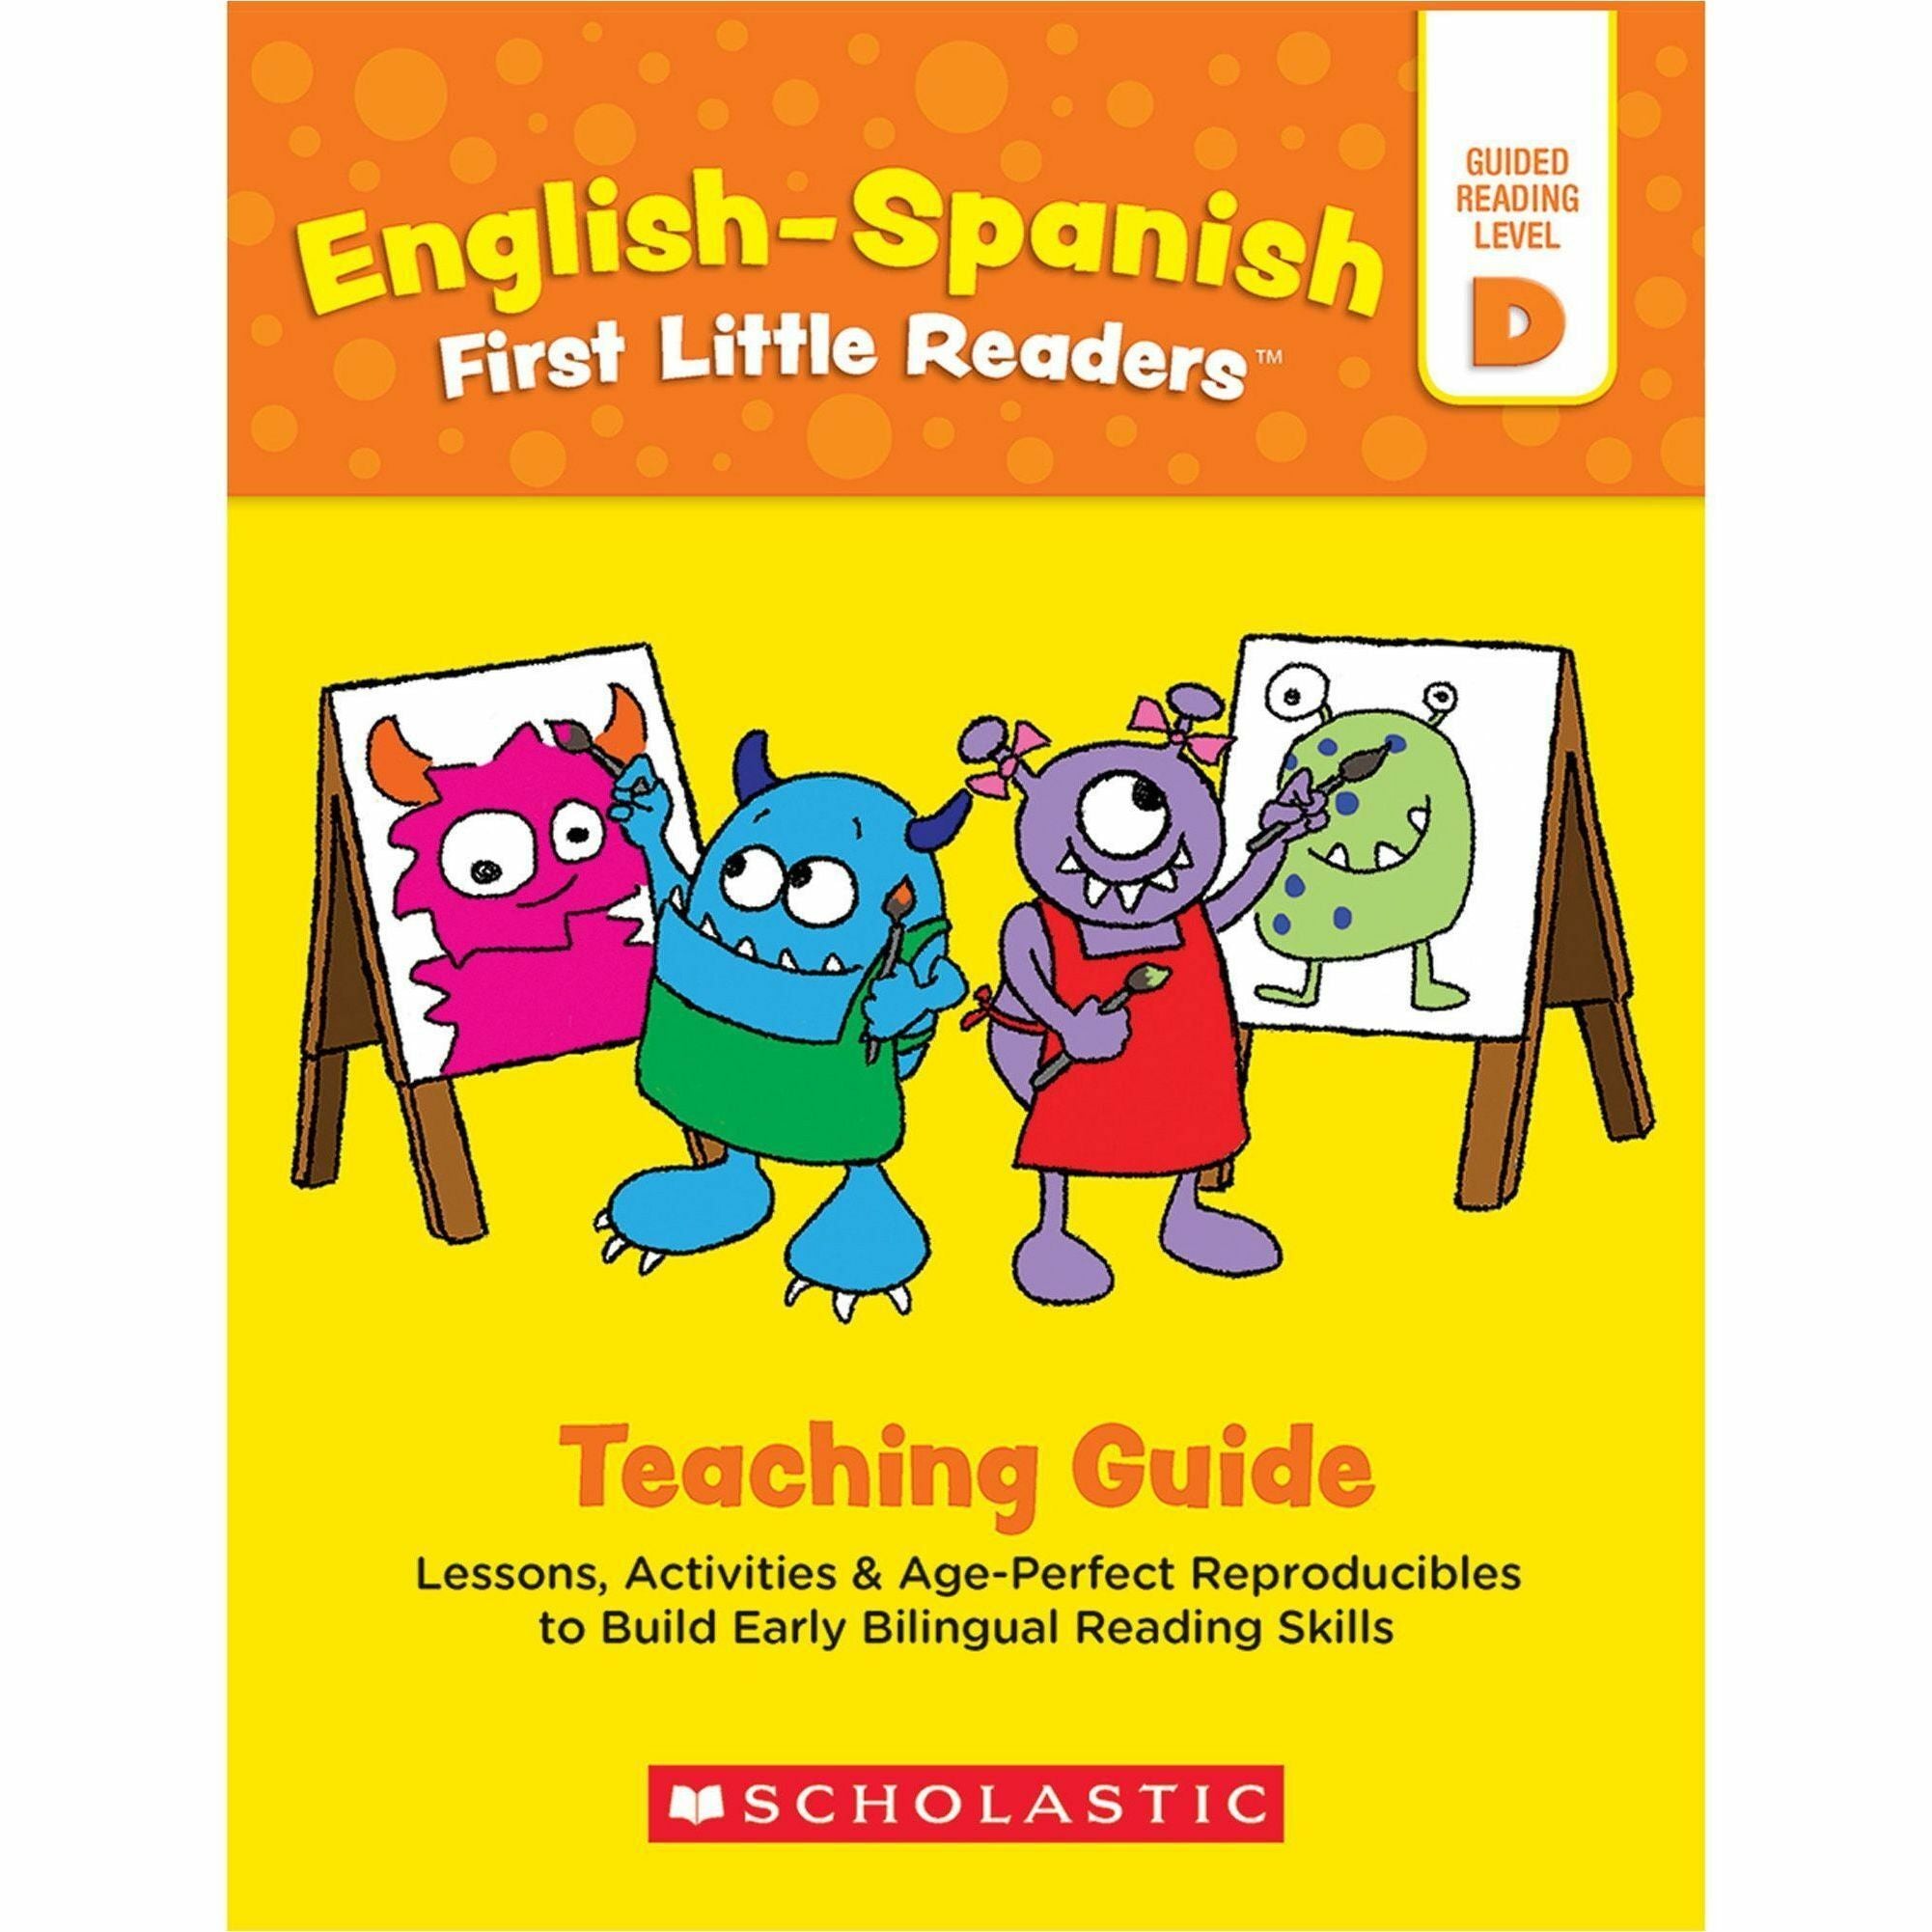 scholastic-first-little-readers-book-set-printed-book-by-liza-charlesworth-8-pages-scholastic-teaching-resources-publication-june-1-2020-book-grade-preschool-2-english-spanish_shs1338668064 - 2